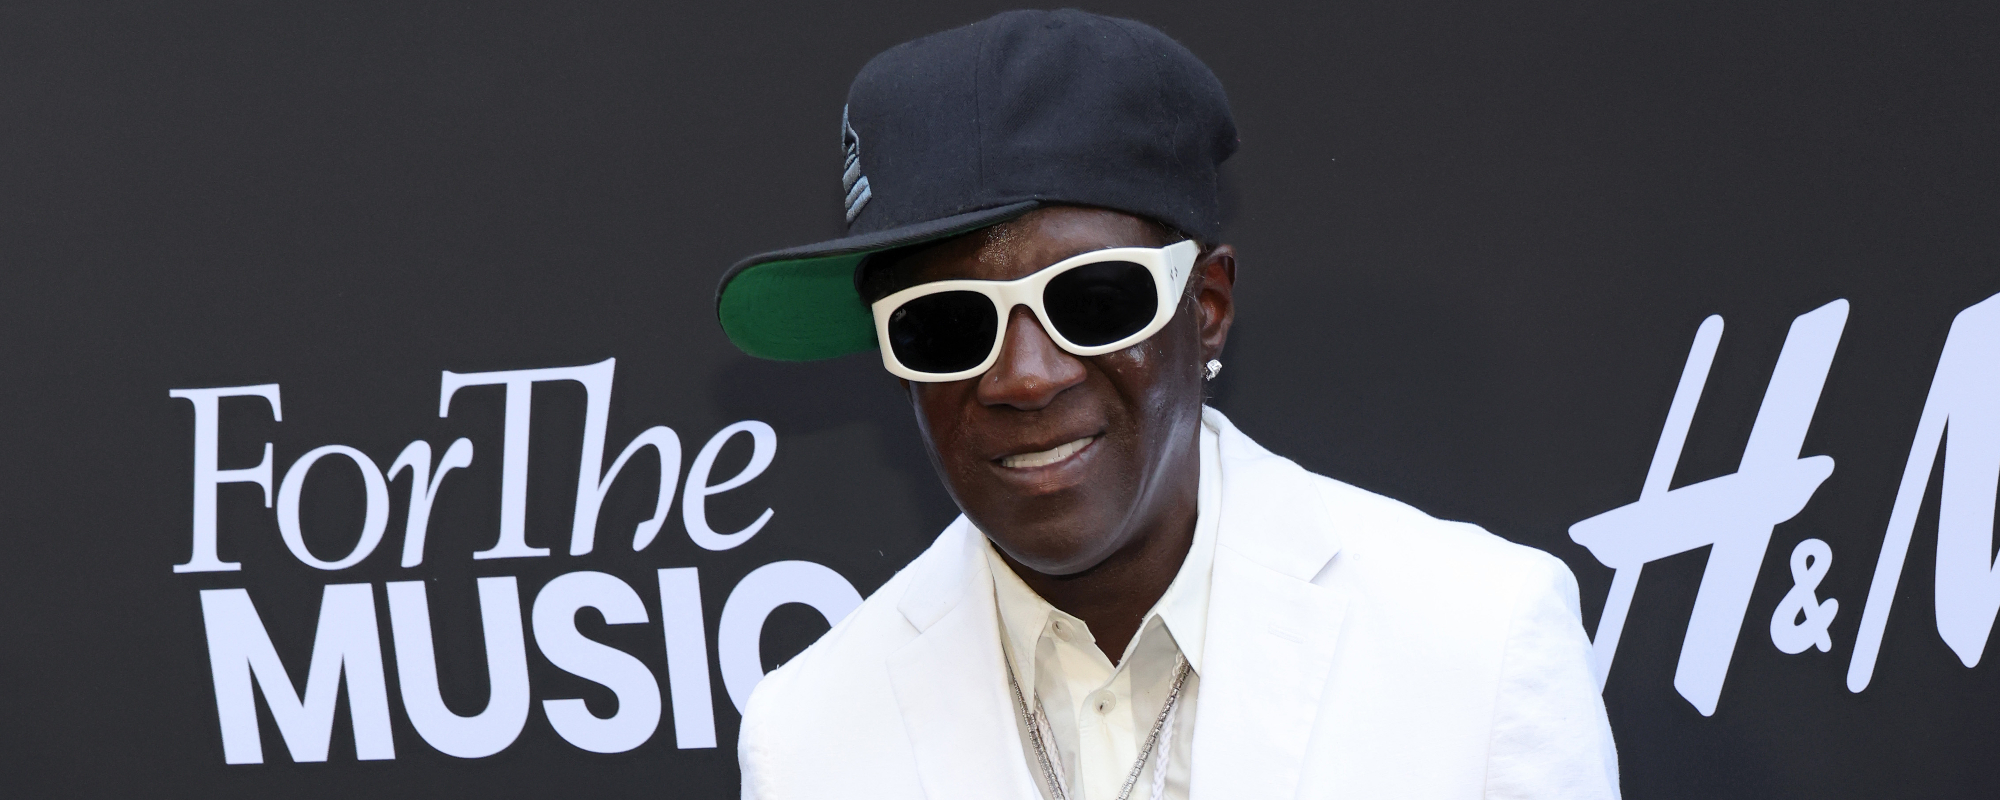 Flavor Flav Labels Himself ”King Swiftie” While Listing Favorite Taylor Swift Song